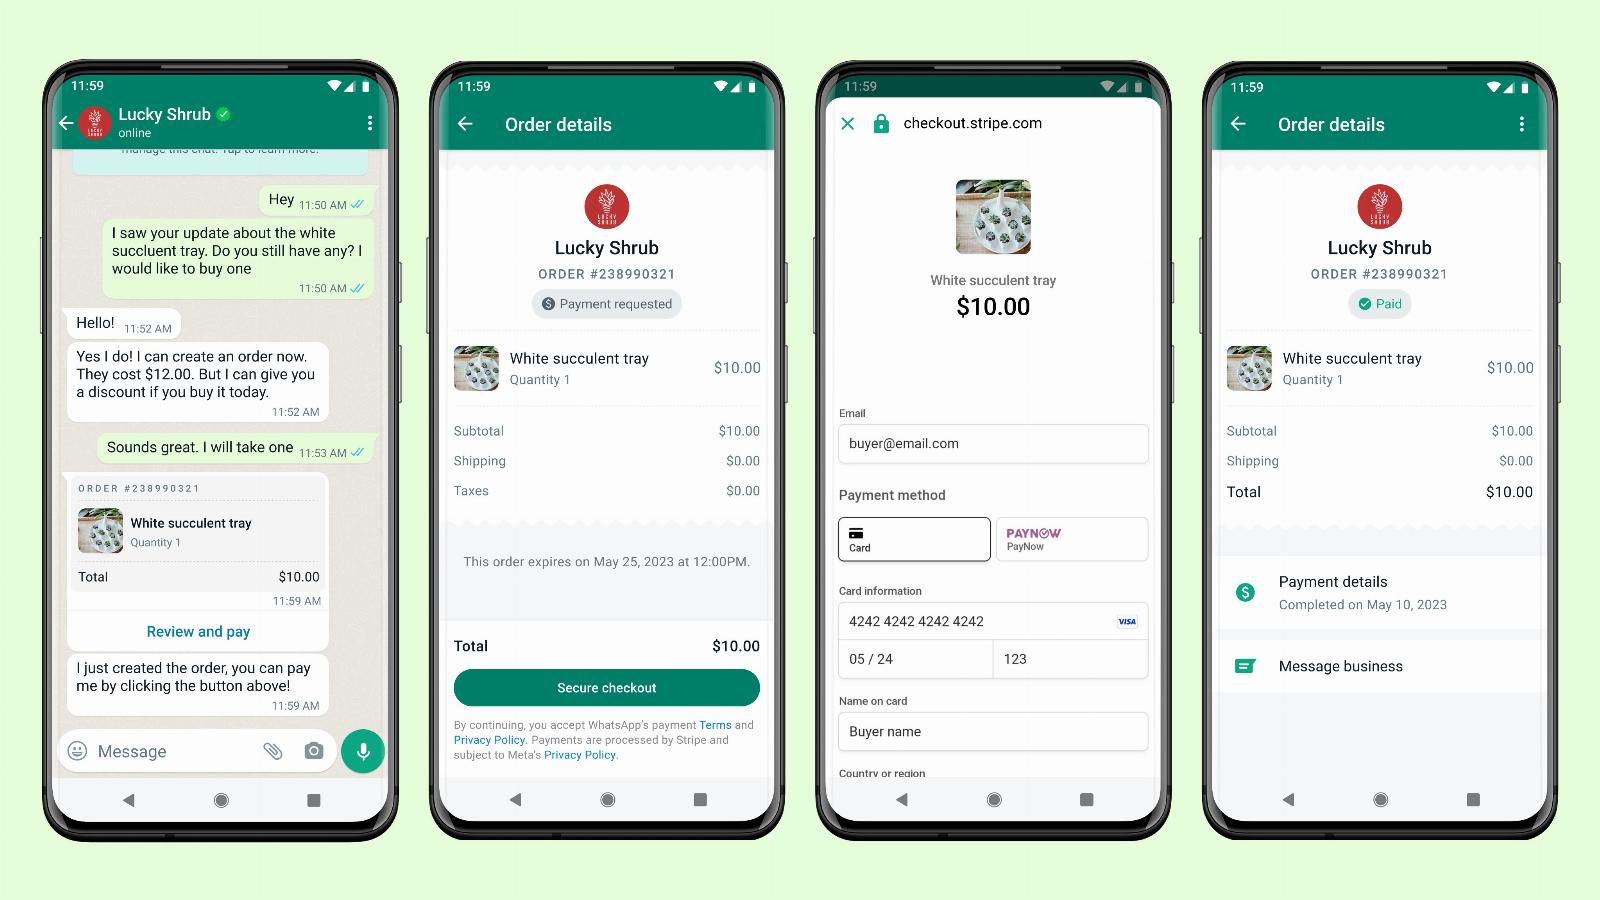 WhatsApp now allows Singapore-based users to pay businesses within the app